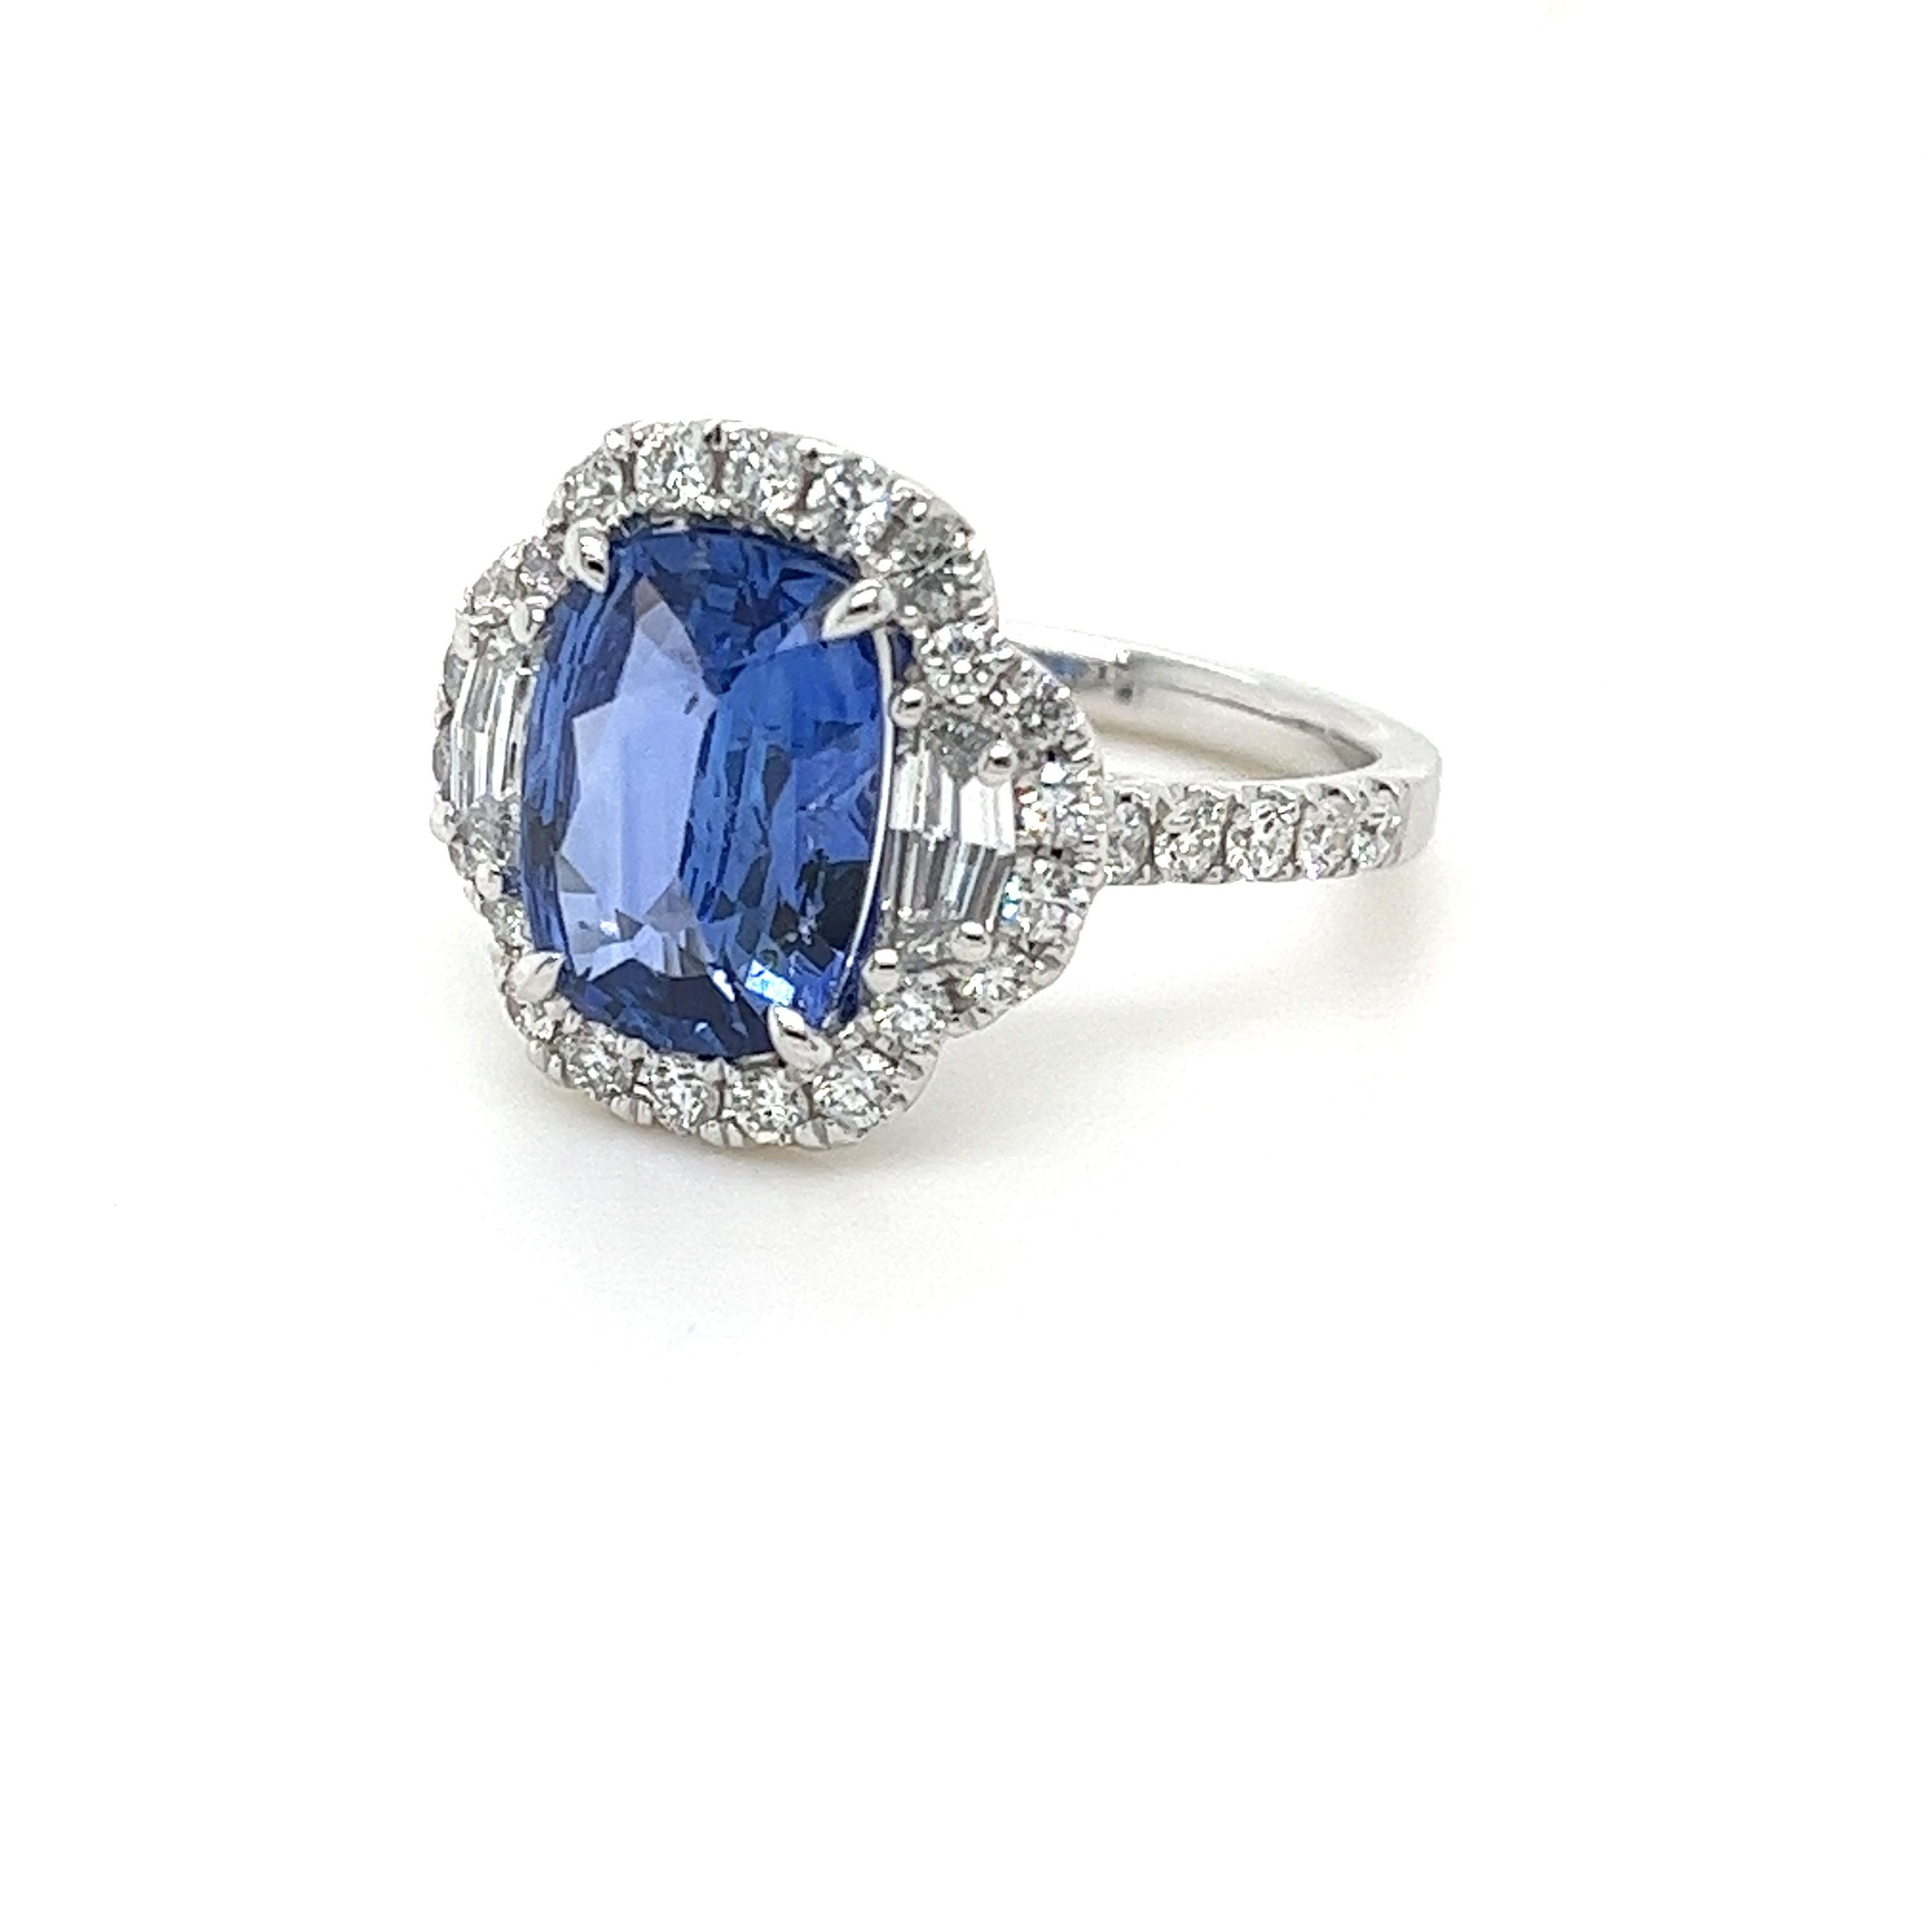 CDC certified cushion Ceylon Sapphire weighing 3.08 carats
Measuring (10.78x8.11x3.96) mm
32 round diamonds weighing .66 carats
2 Cadillac diamonds weighing .41 carats
E-VVS
Set in 18k white gold ring
5.01 g